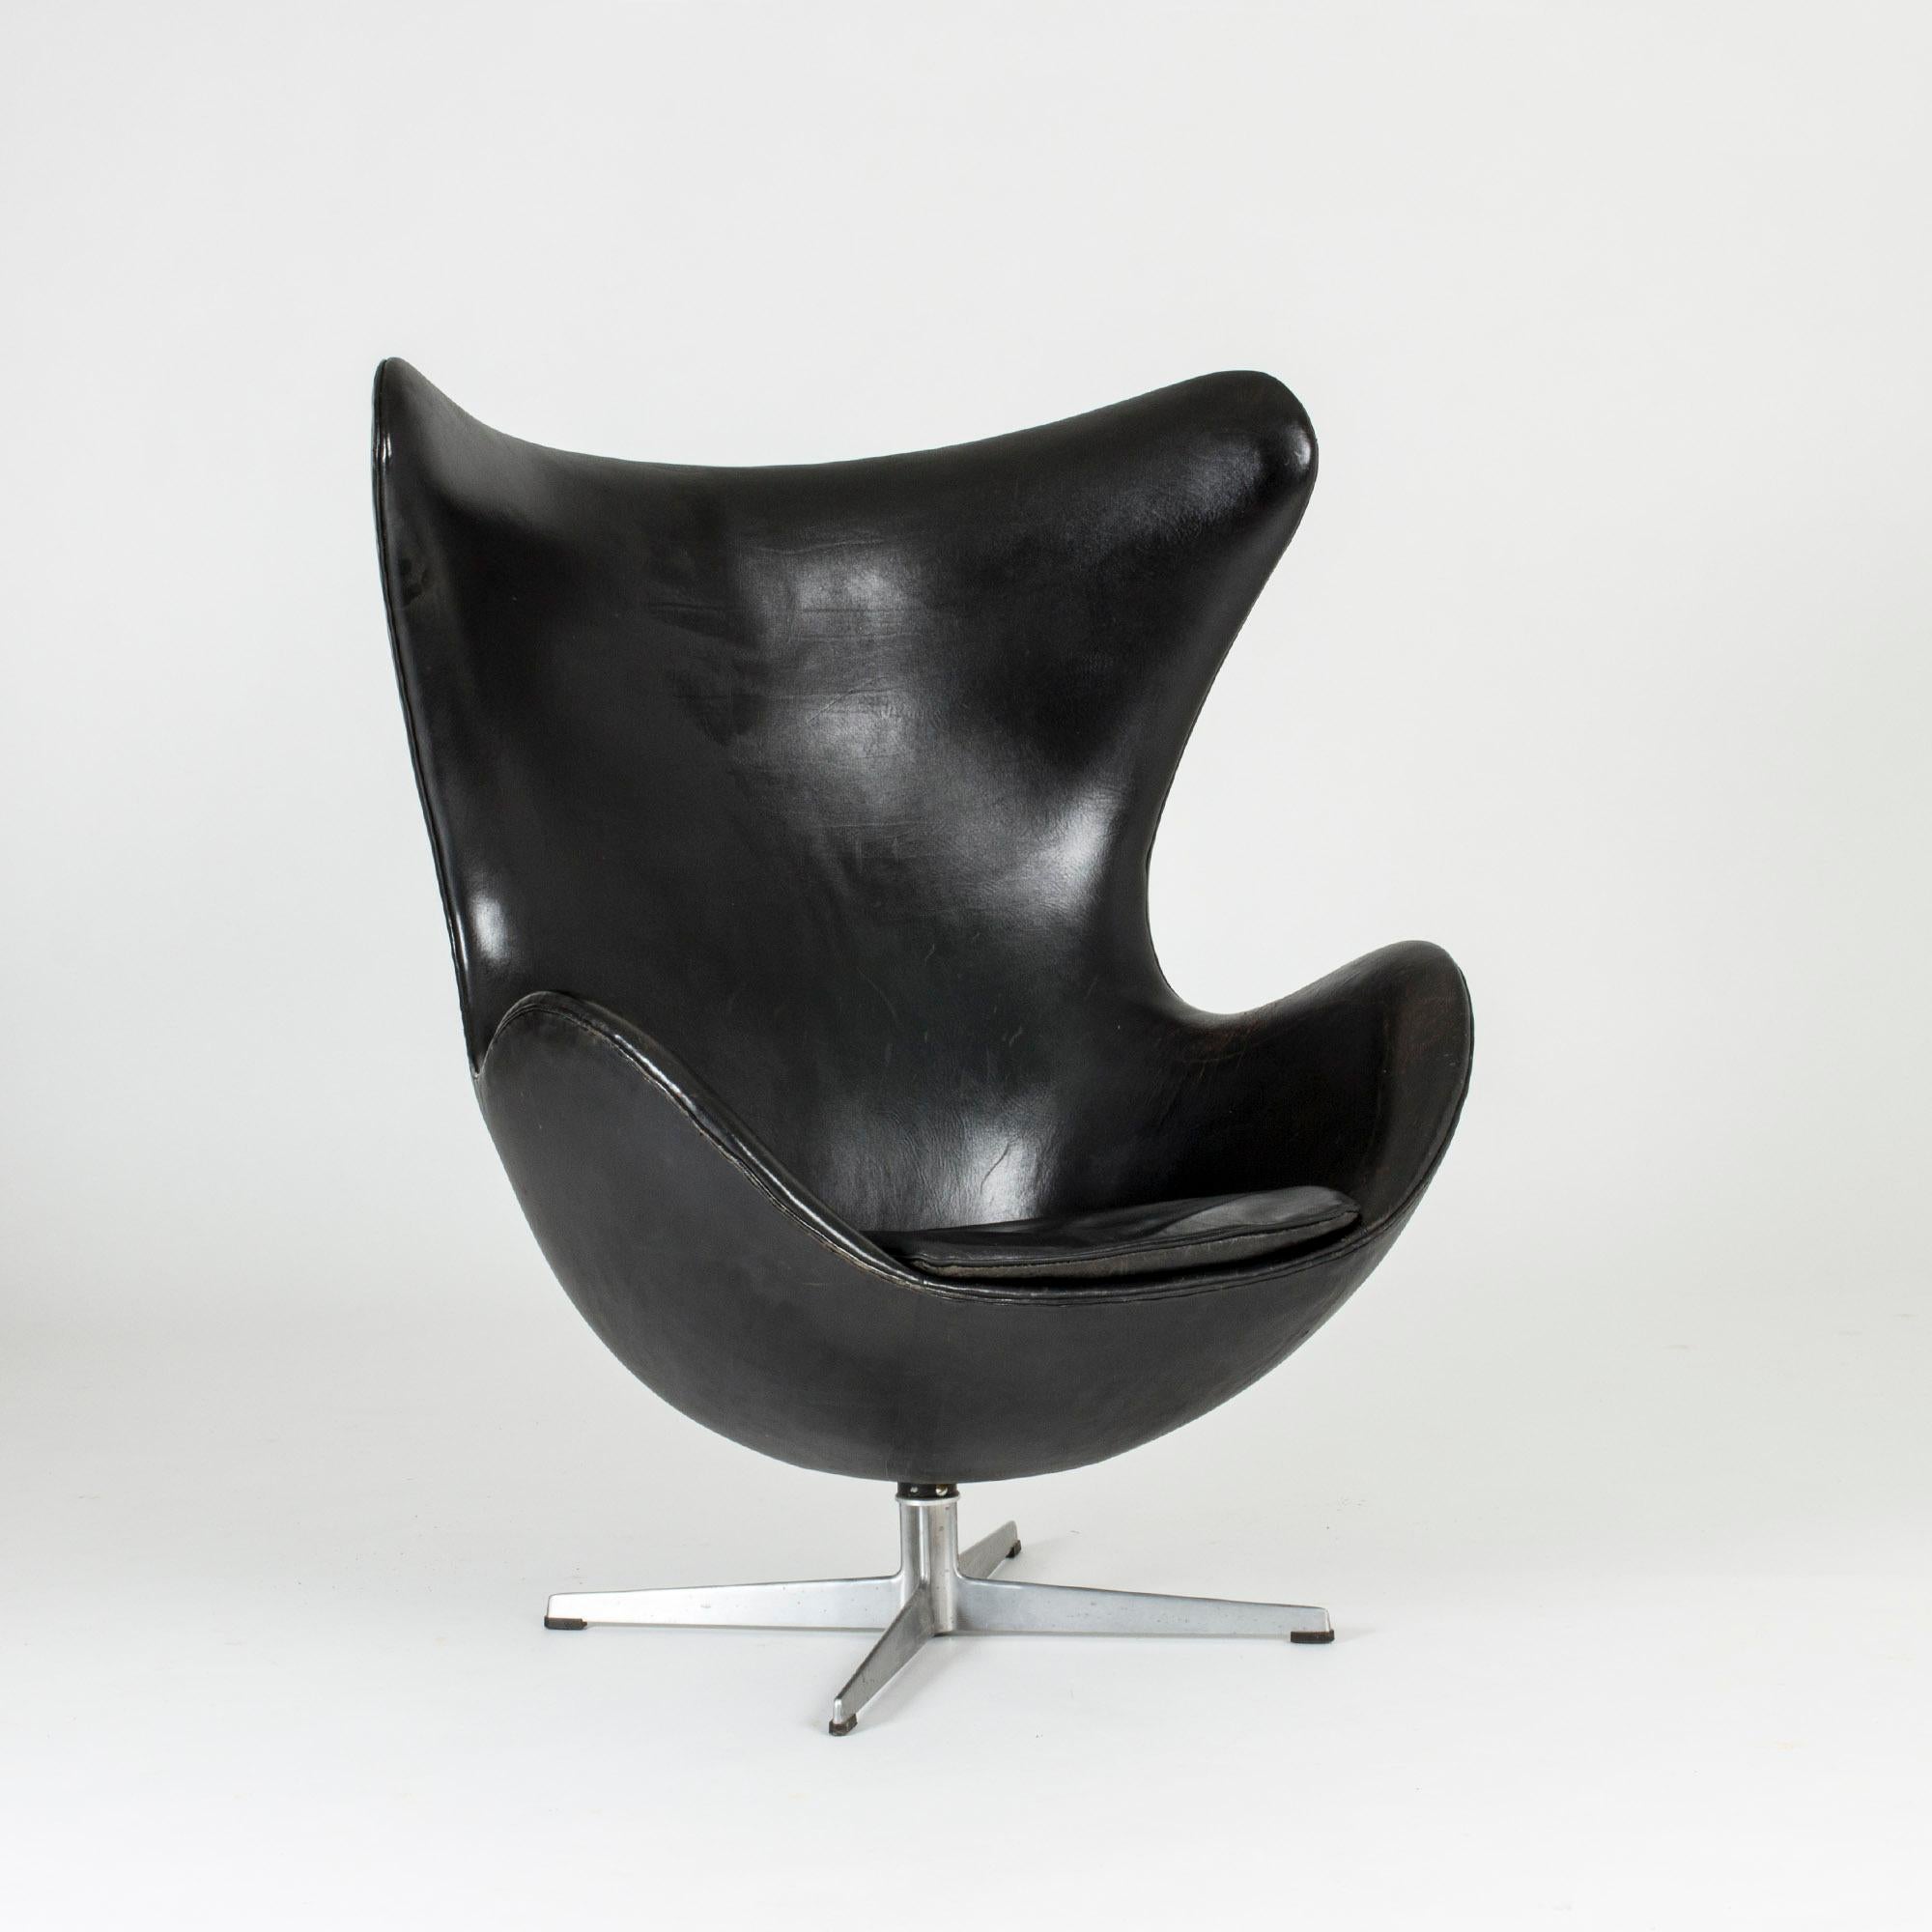 Iconic “Egg” lounge chair by Arne Jacobsen, upholstered with black leather in very good condition. This design was originally made for the SAS Radisson Hotel in Copenhagen in 1958.